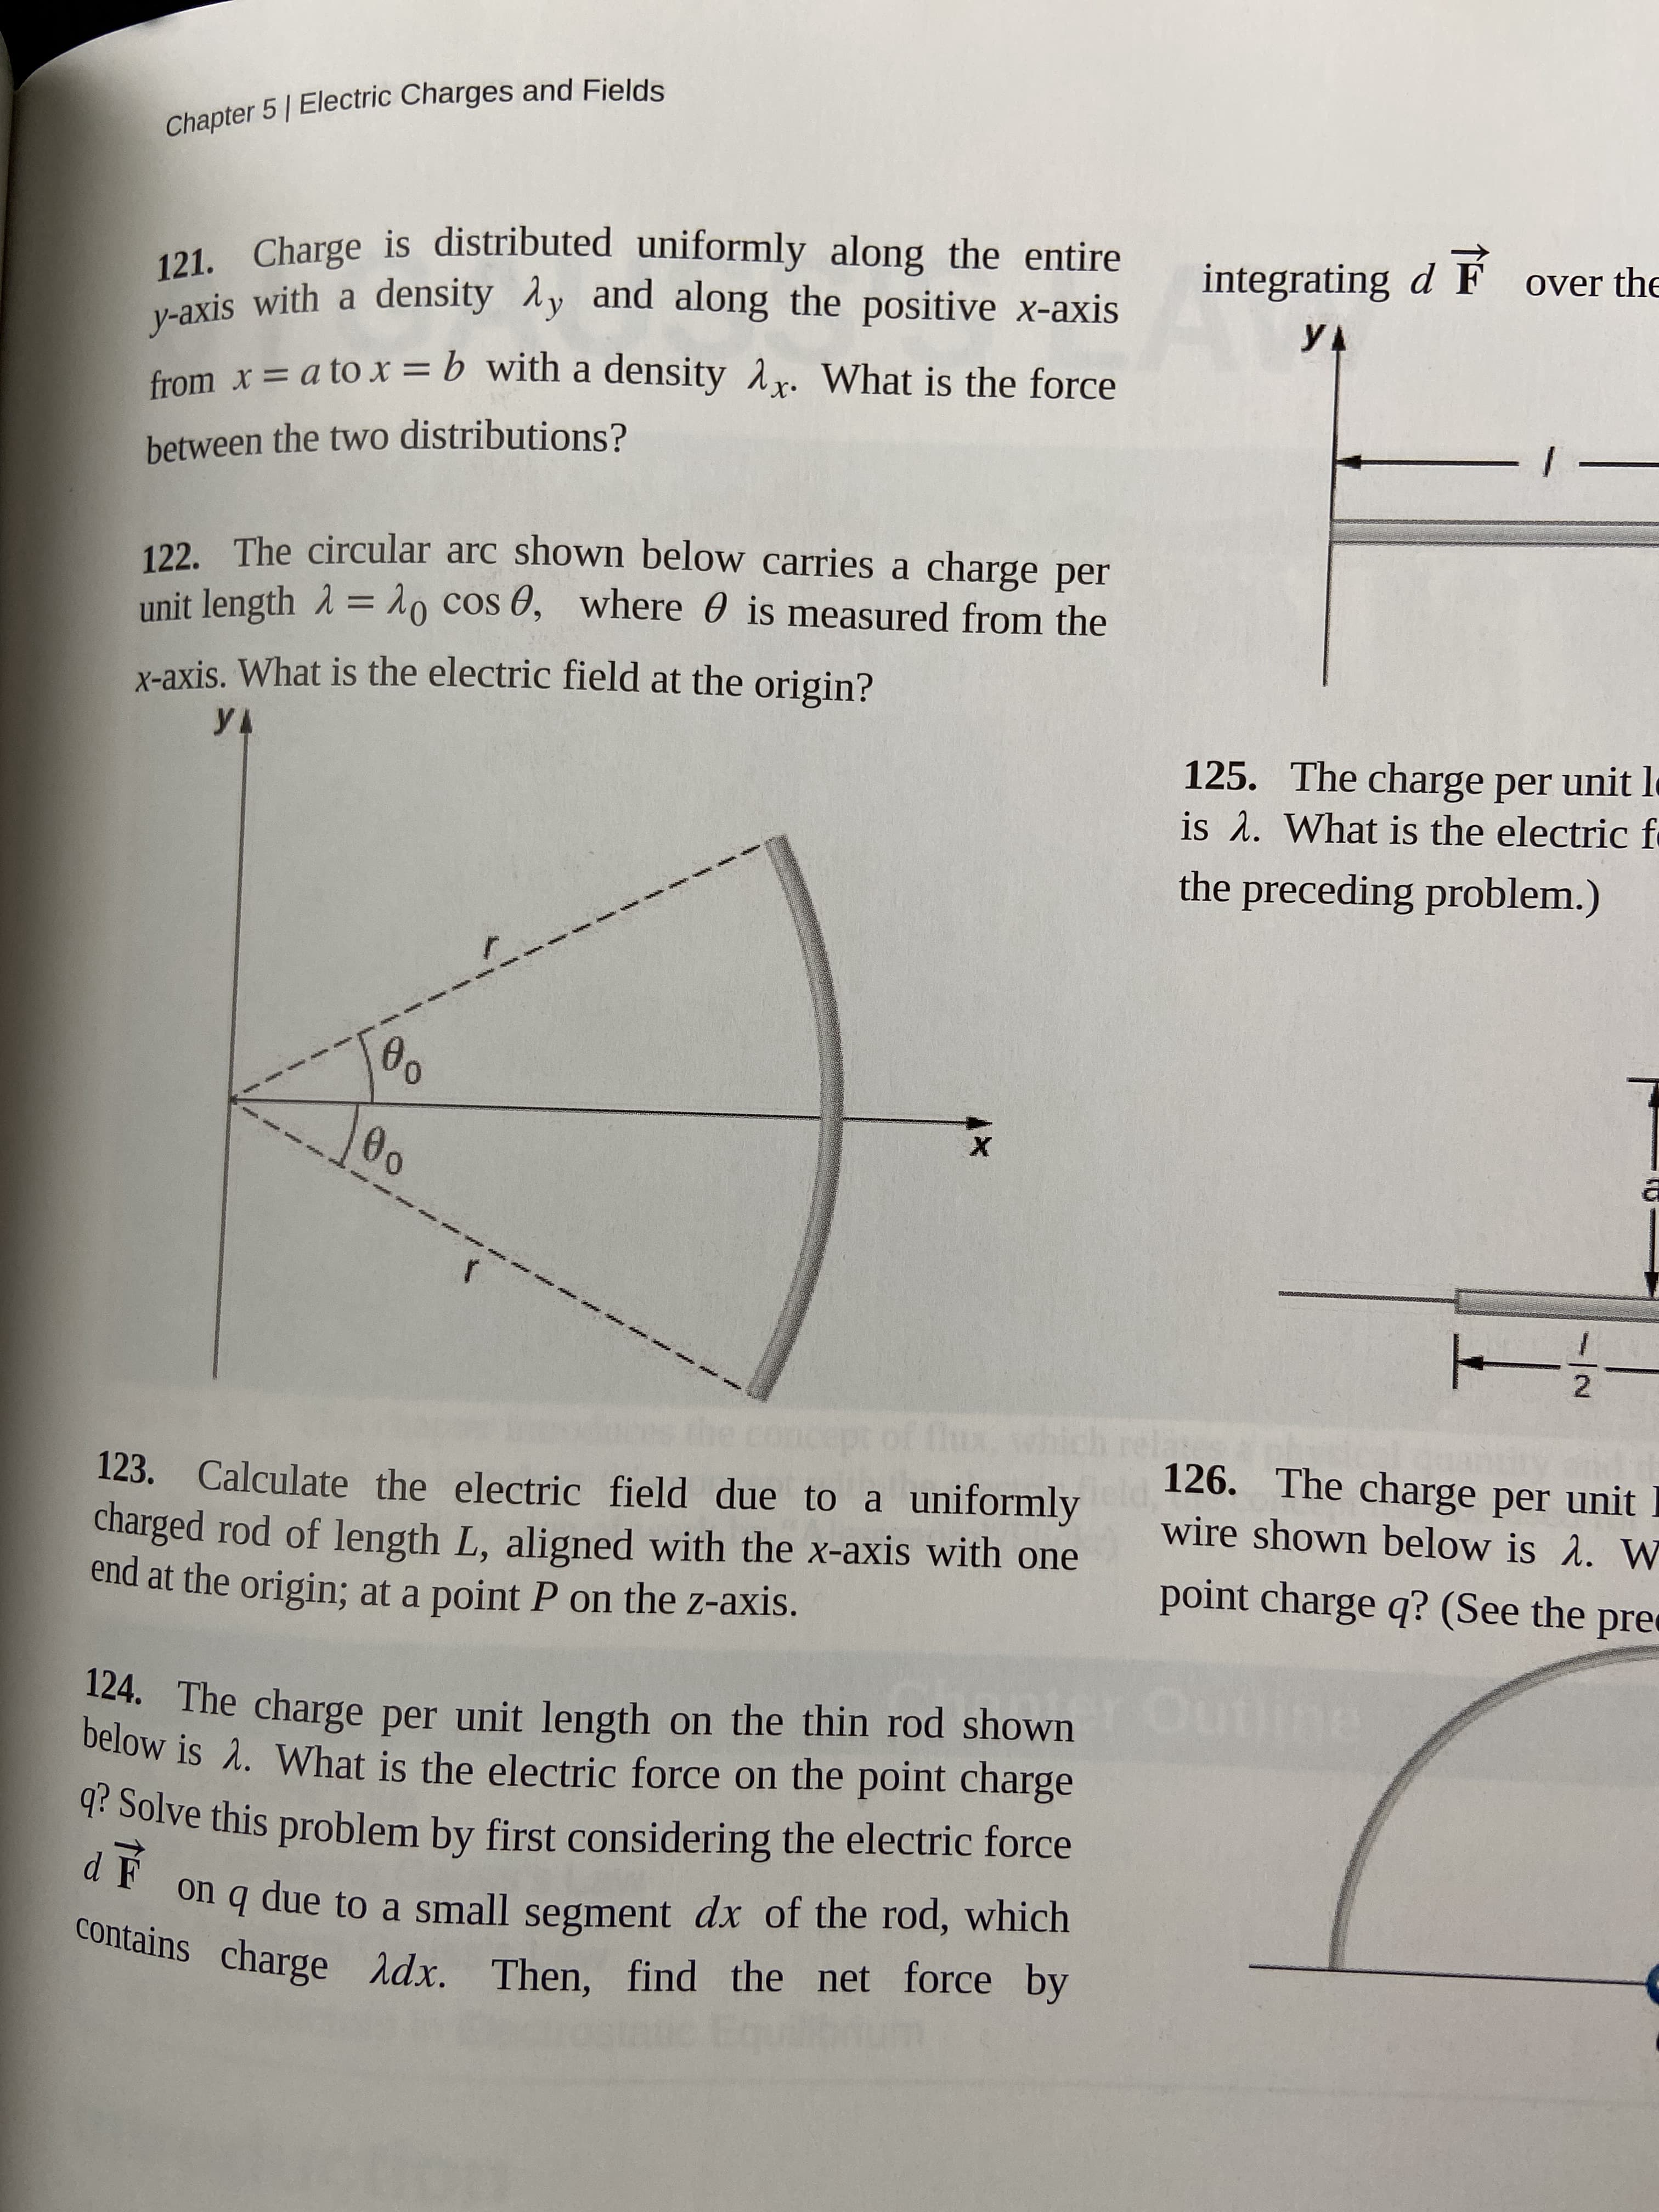 122. The circular arc shown below carries a charge per
unit length 1 = 10 cos 6, where 0 is measured from the
X-axis. What is the electric field at the origin?
00
00
